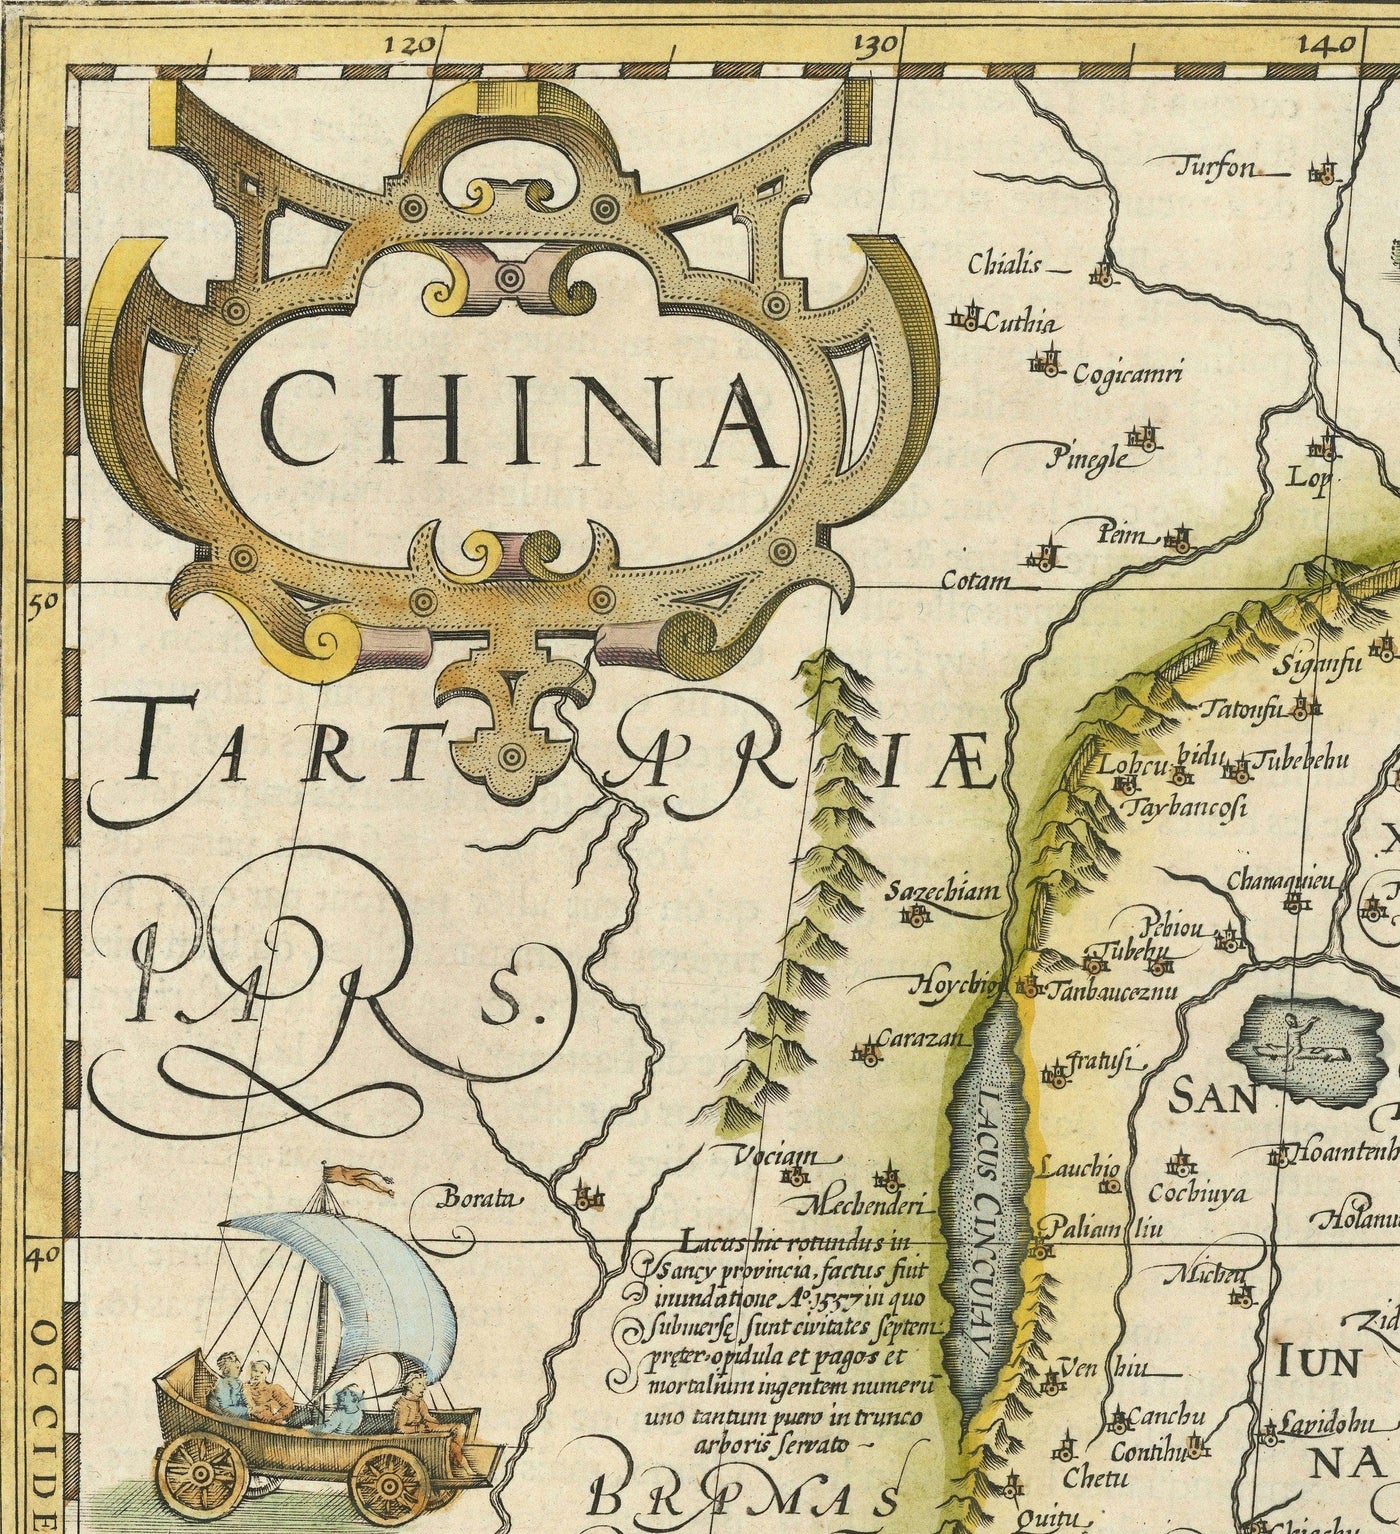 Old Map of China, 1606 by Jodocus Hondius - Korea, Japan, Great Wall, South East Asia, Orient, Weird Sea Monsters